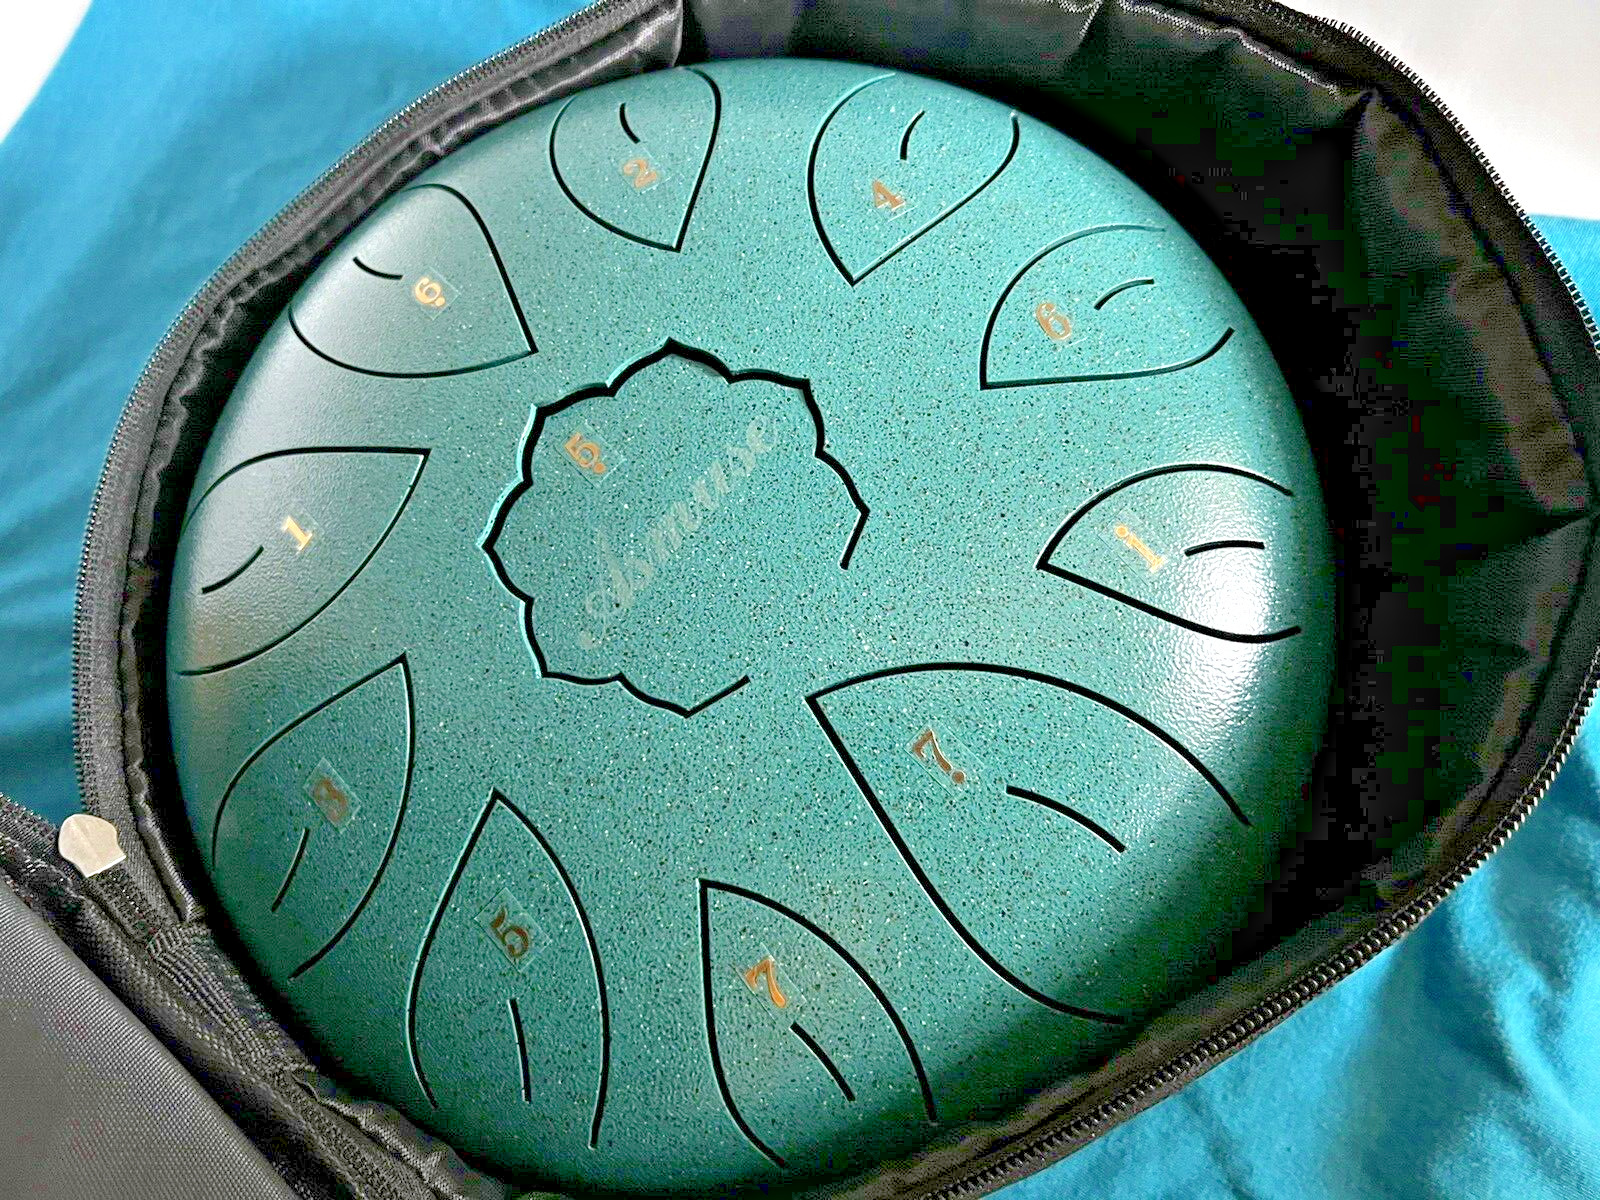 Steel Tongue Drum 11 Notes 10 Inch Diameter Meditation Relaxation Soothing +case